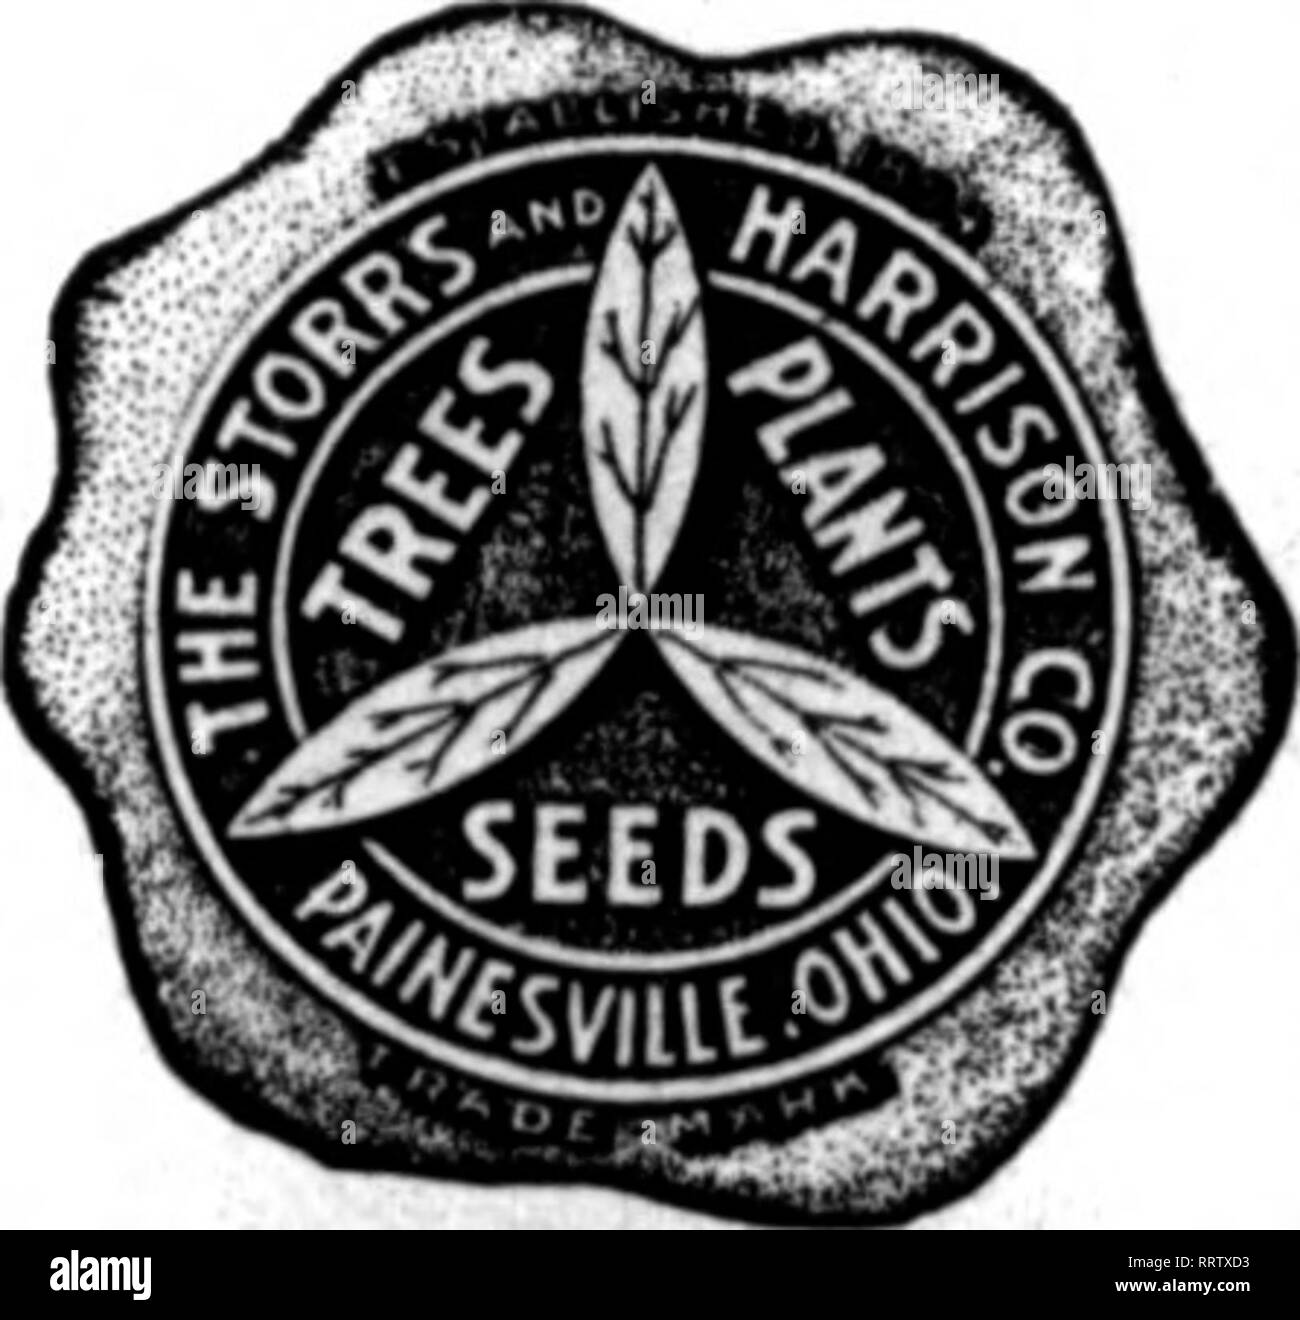 . Florists' review [microform]. Floriculture. &quot;'Superb Quality SEEDS FOR FLORISTS jj THE STORRS A. HARRISON CO.'S SUPERB MIXTURE OF GIANT PANSY SEED Contains the Ultiimte in Giant Pansies. You cannot buy a better mixture of Pansy Seed at any price. Trade Packet, 50c; ^ oz., $1.25: oz., f4.00. We carry in stock all named and separate colors of Giant Pansies, also the best strains of Odier, Gassier, Bu«mot, Trimardeau, etc. (See our trade list for prices.) Cineraria Grandiflora •trarn)!'trad.pa'^k.n$i!oo Bellis Perennis (EDgiish Daisy) Lonefellow (red). Snowball (white). Tr. Pkt., 36c: Mixe Stock Photo